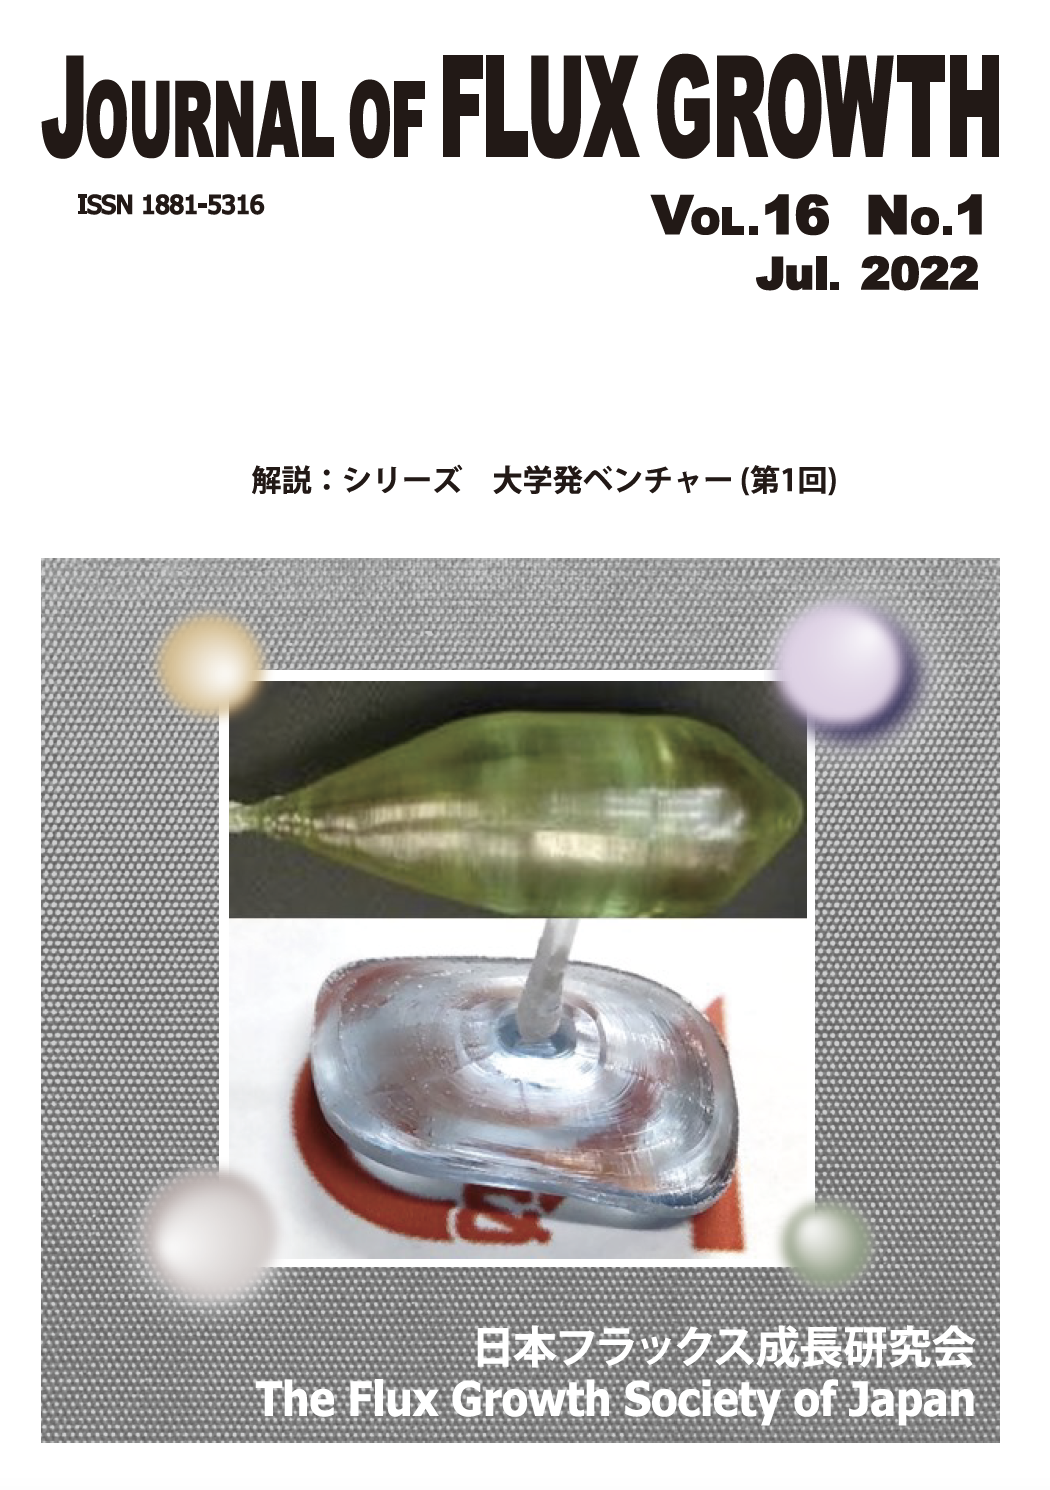 JOURNAL OF FLUX GROWTH Vol.16 No.1